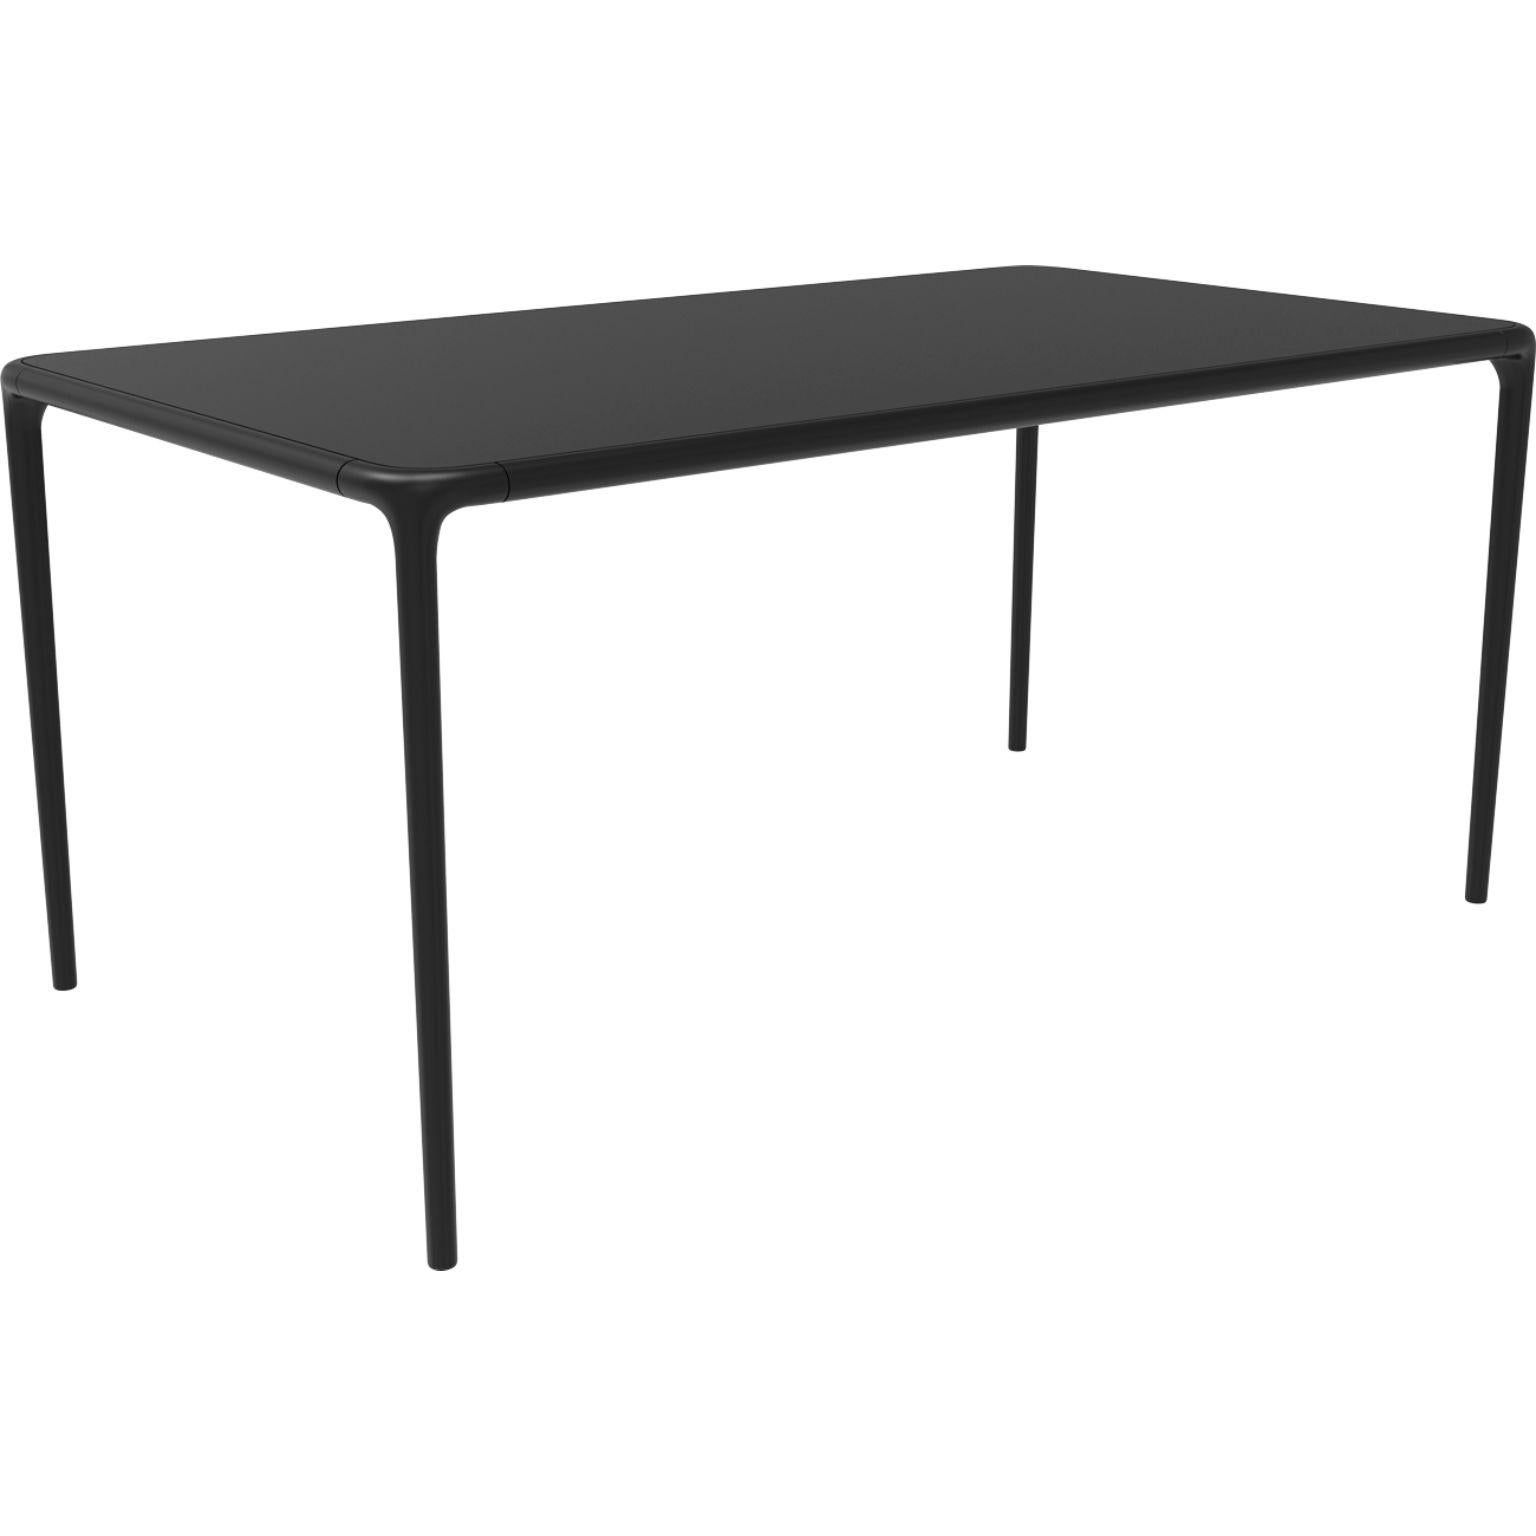 Xaloc black glass top table 160 by Mowee
Dimensions: D 160 x W 90 x H 74 cm
Material: Aluminum, tinted tempered glass top.
Also available in different aluminum colors and finishes (HPL Black Edge or Neolith).

 Xaloc synthesizes the lines of